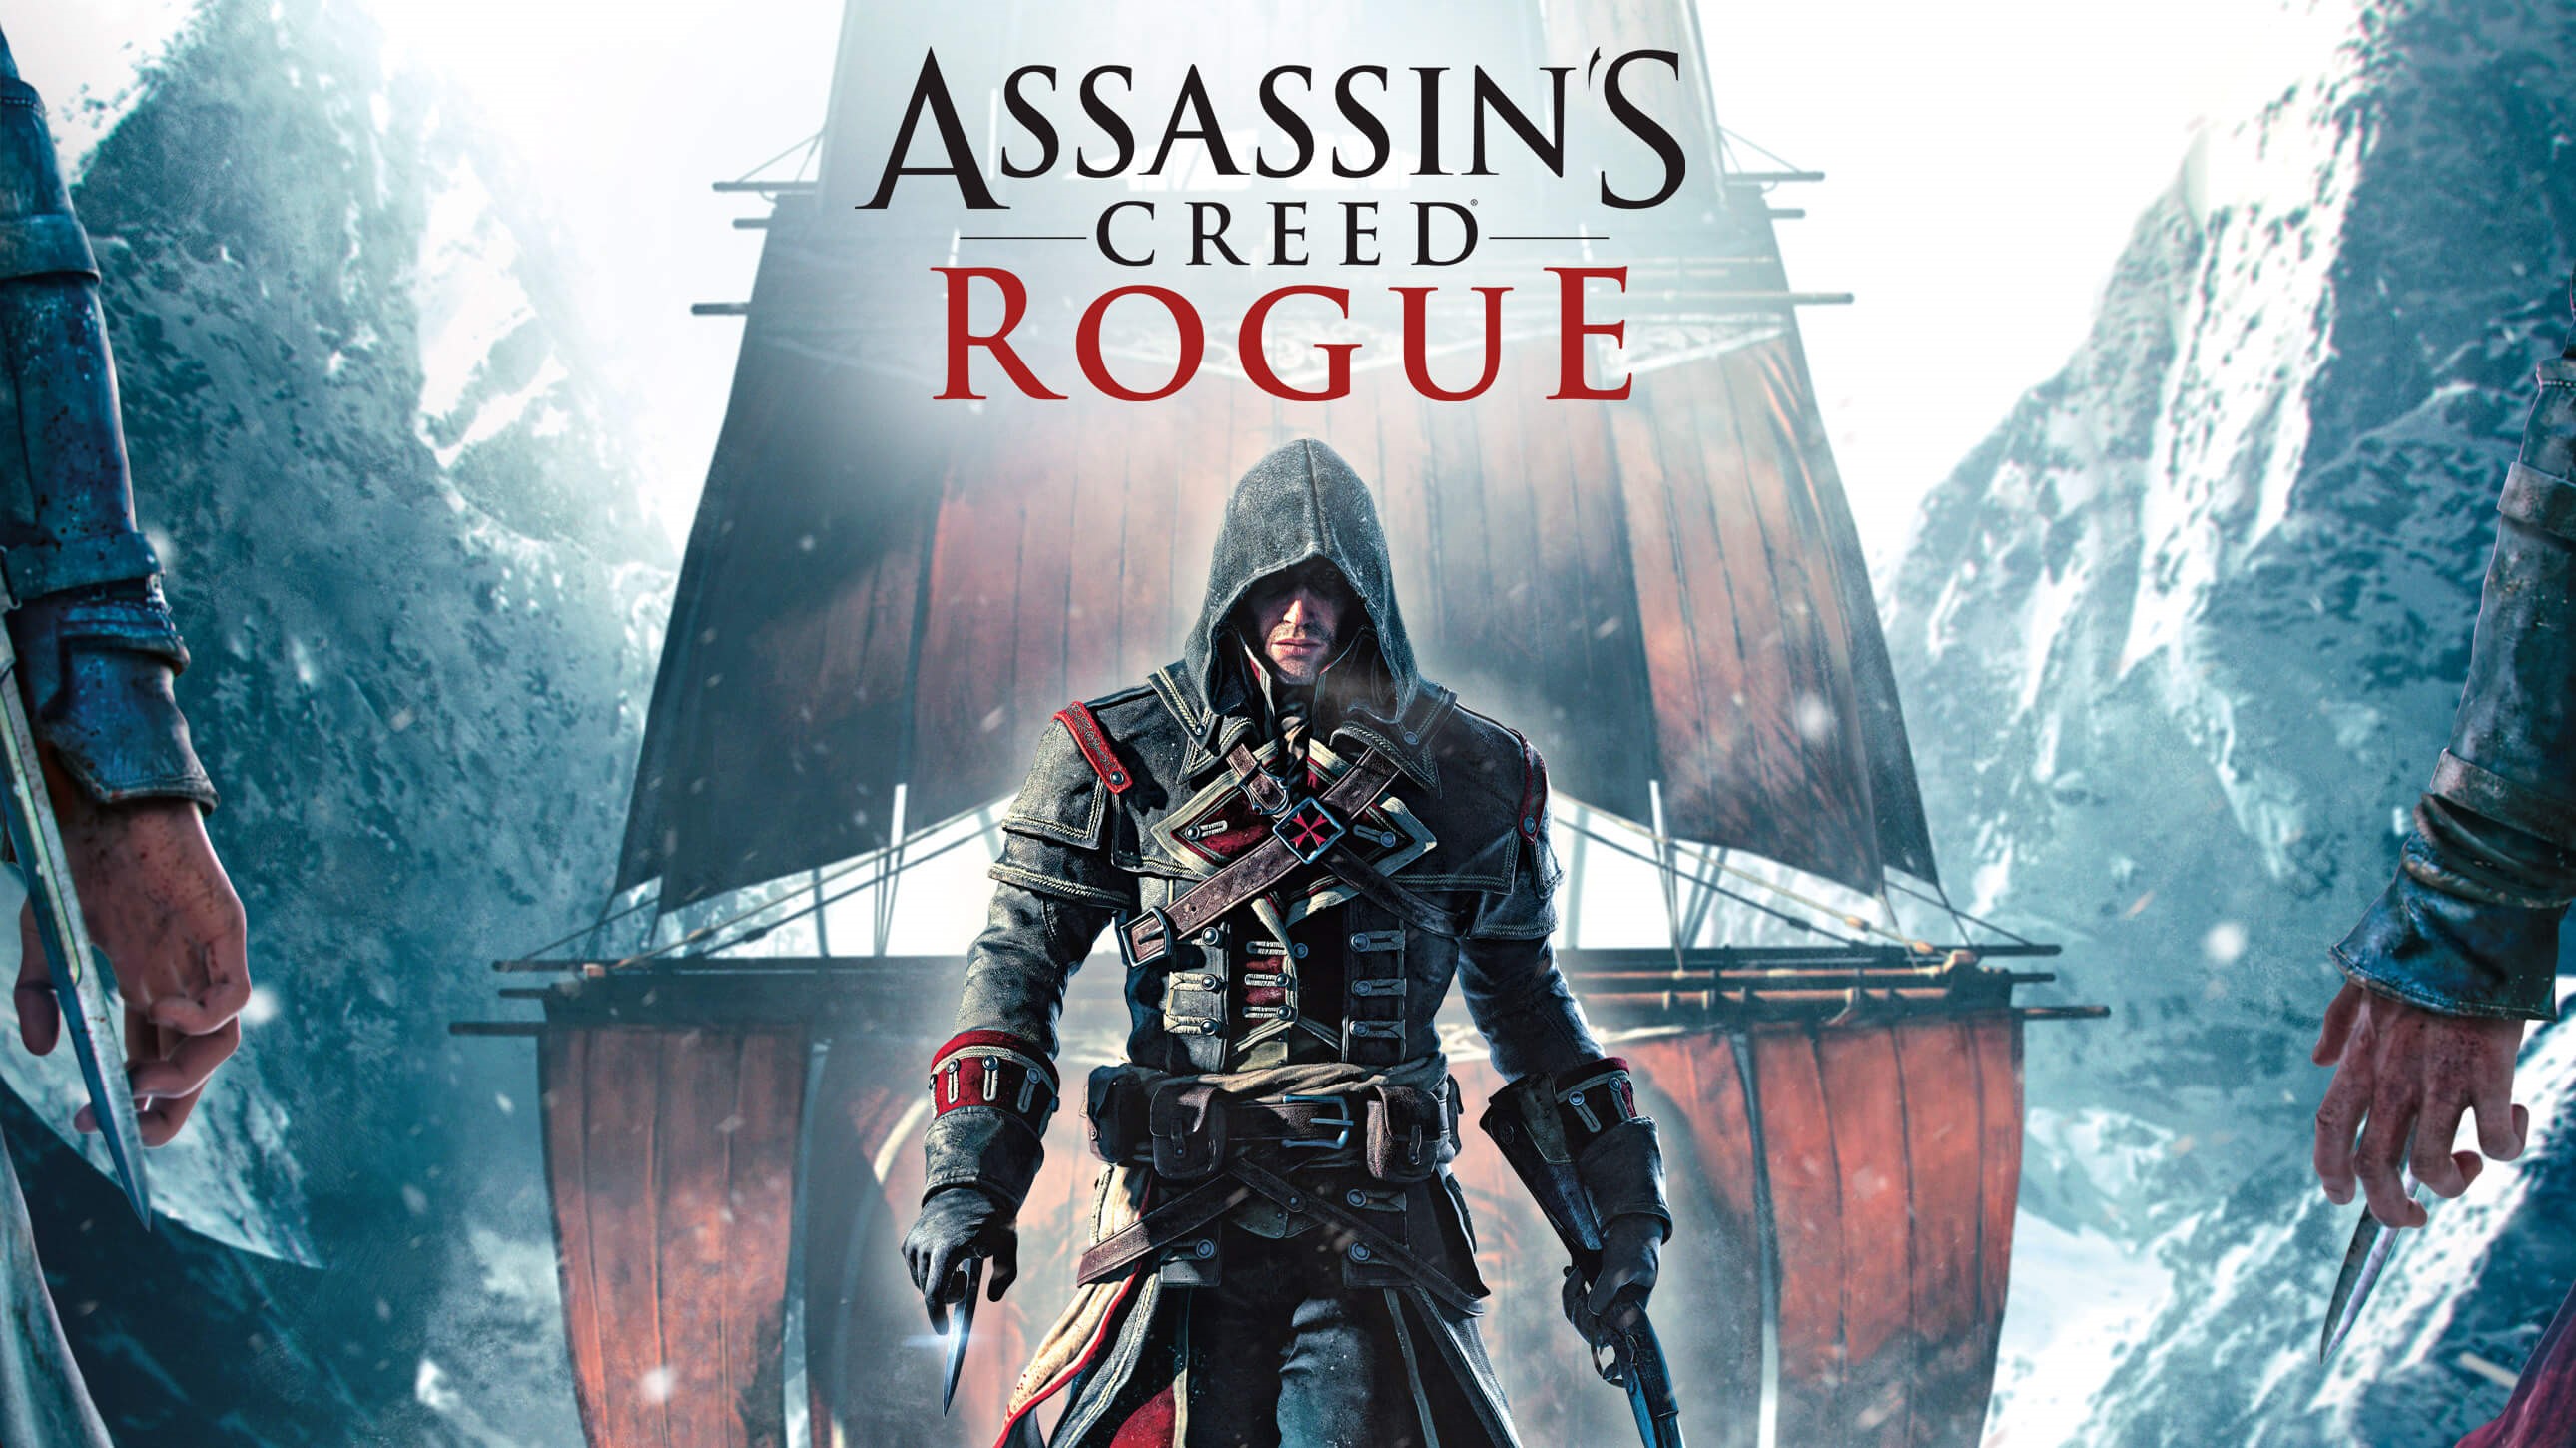 Creed rogue steam